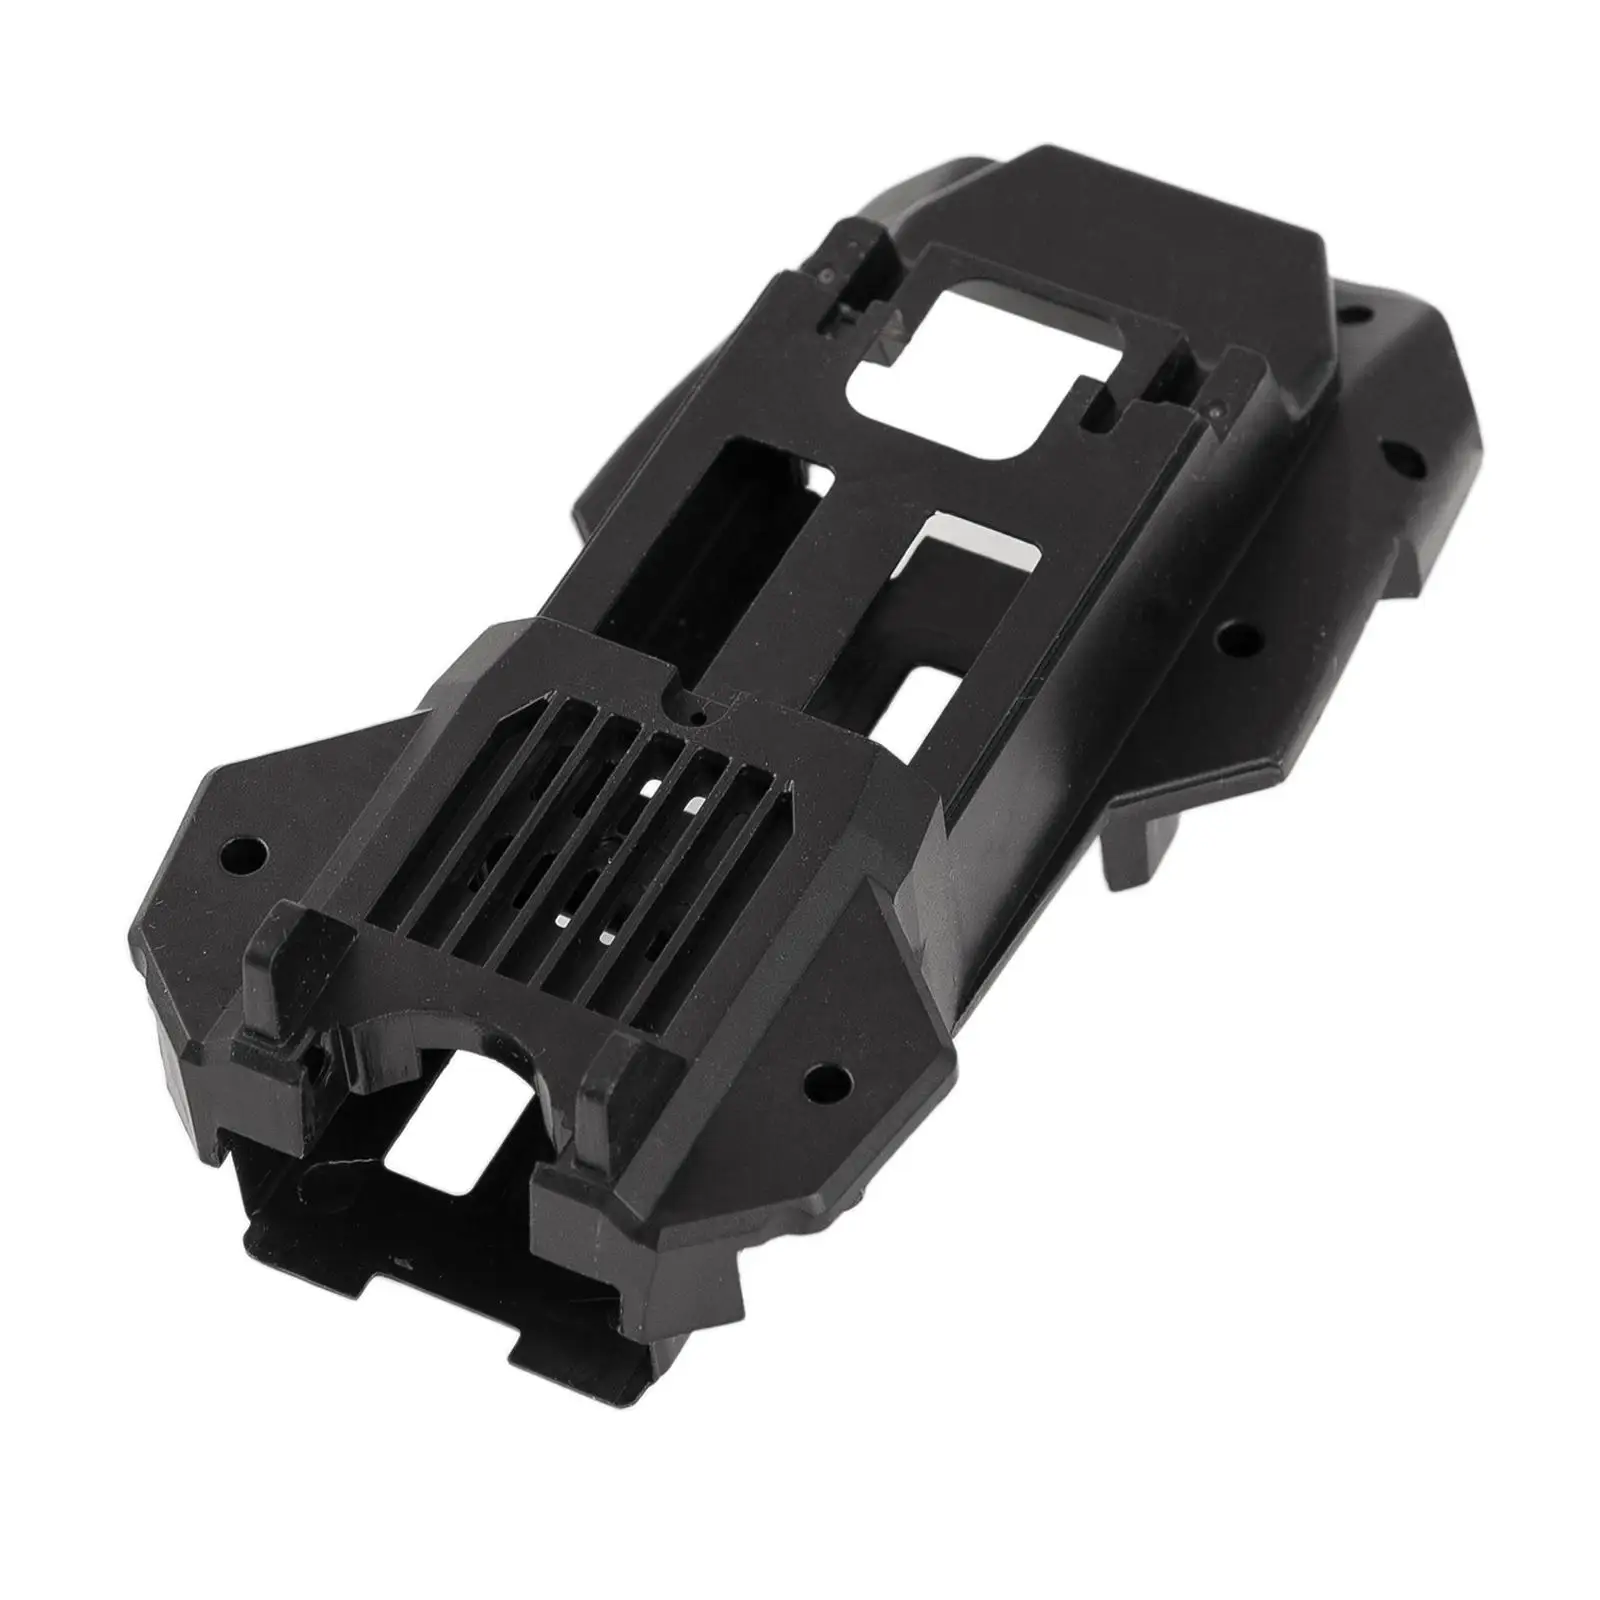 E88 Per Foldable  Accessory,  Arm / Engine with Base / Board / Top Shell / Lower Shell, Easy to Install , 